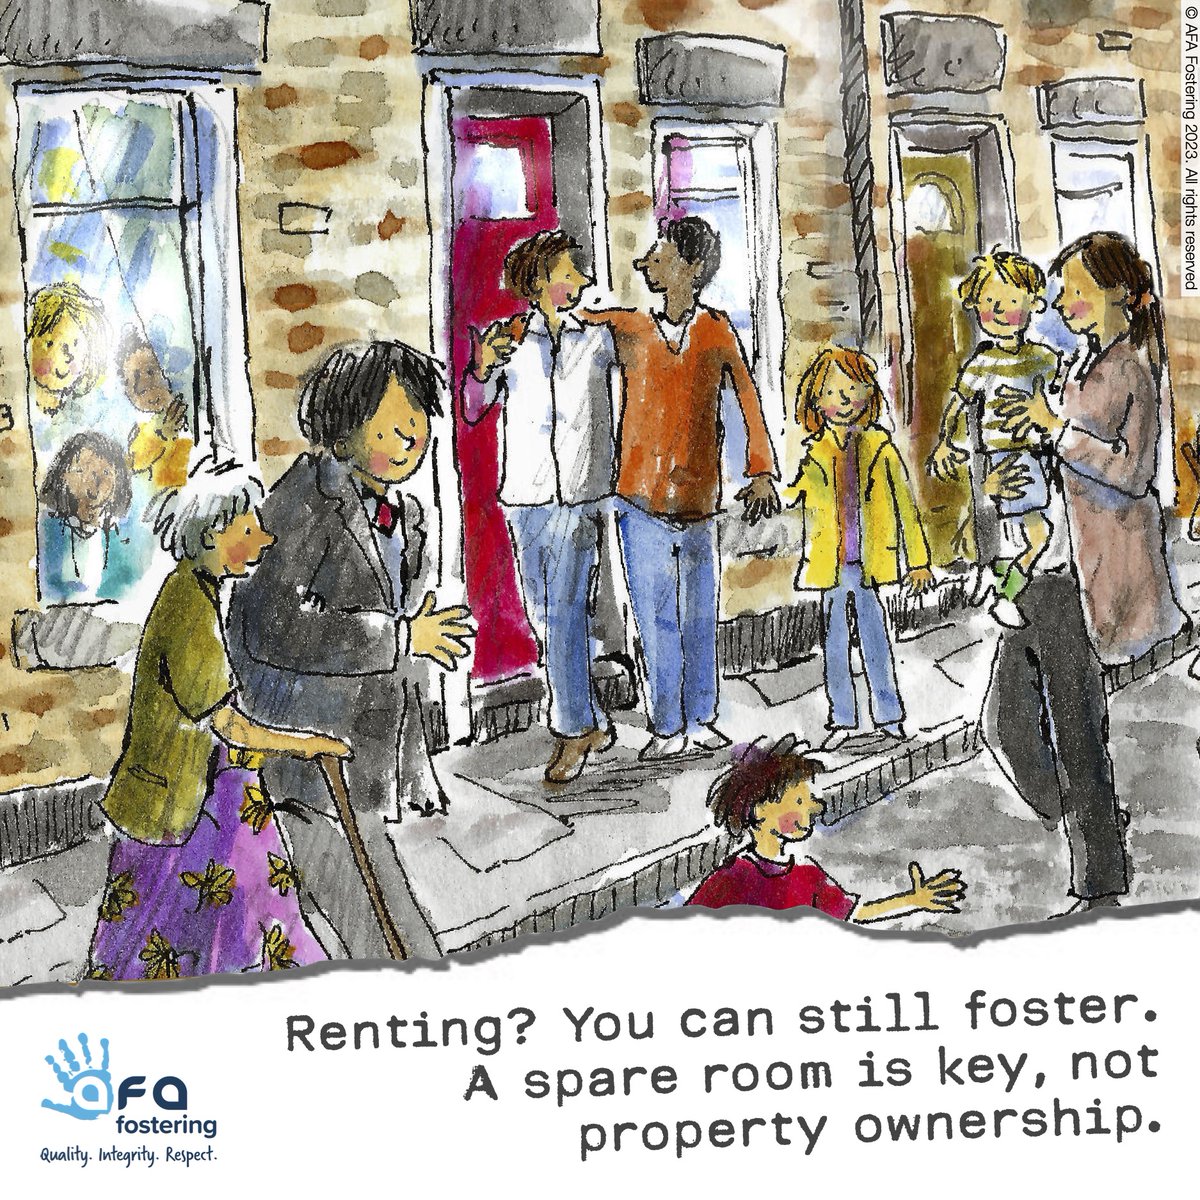 Fostering in rented property? Absolutely! Spare room is key, not house size. Eager to offer love? Call 0333 358 3217. #FosteringInRentedHomes #MakeAnImpact